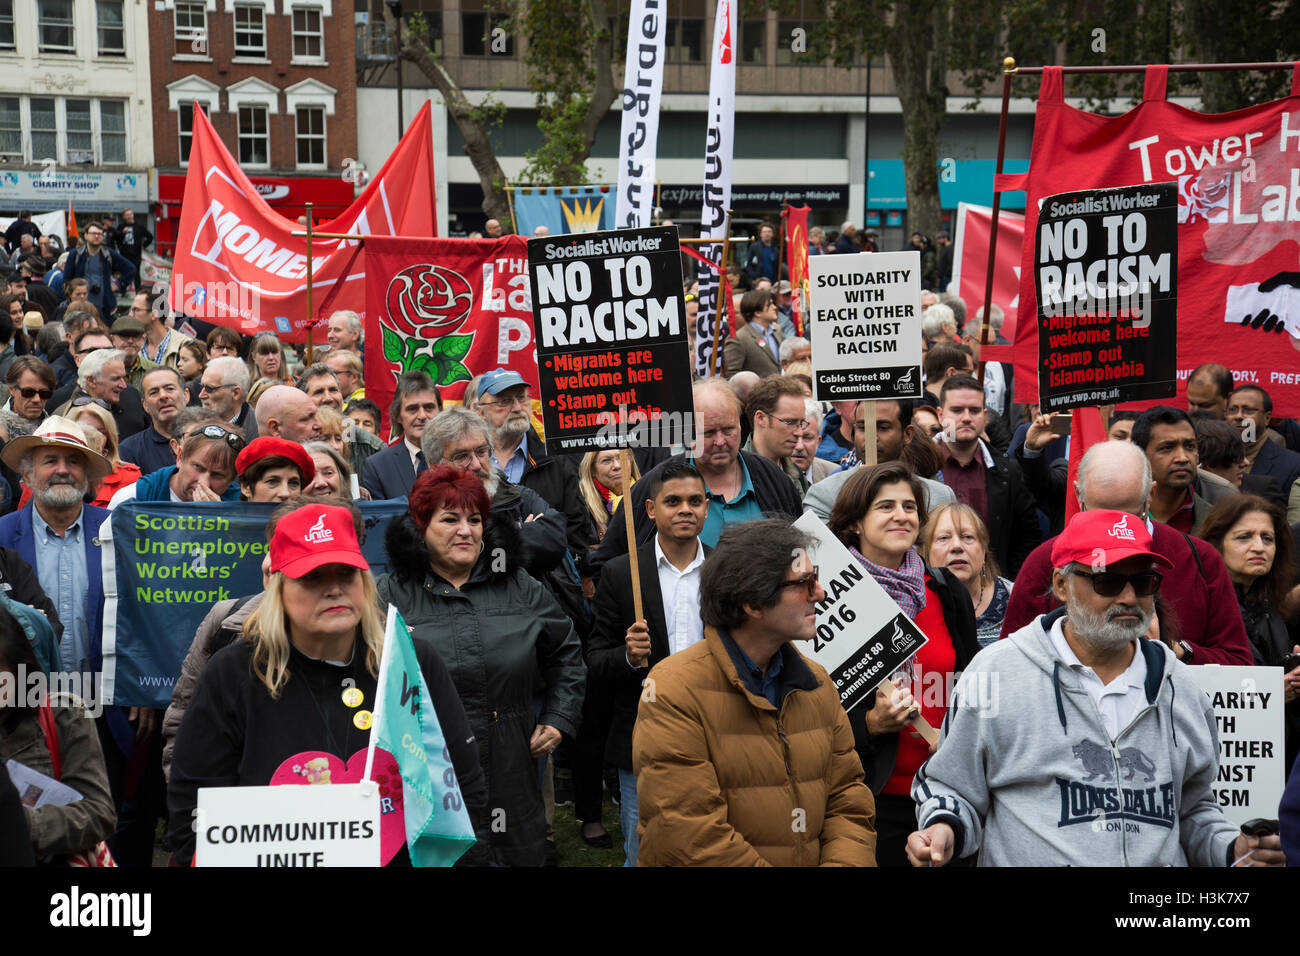 London,  UK. 9th October, 2016. People gather in Altab Ali Park for the Cable Street 80 march and rally through Whitechapel to mark the 80th anniversary of the Battle of Cable Street on 9th October 2016 in London, United Kingdom. The demonstration marks the day when tens of thousands of people across the East End, joined by others who came to support them, prevented Oswald Mosley’s British Union of Fascists invading the Jewish areas of the East End. The day, which is recognised as a major turning point in the struggle against fascism in Britain in the 1930s. Credit:  Michael Kemp/Alamy Live Ne Stock Photo